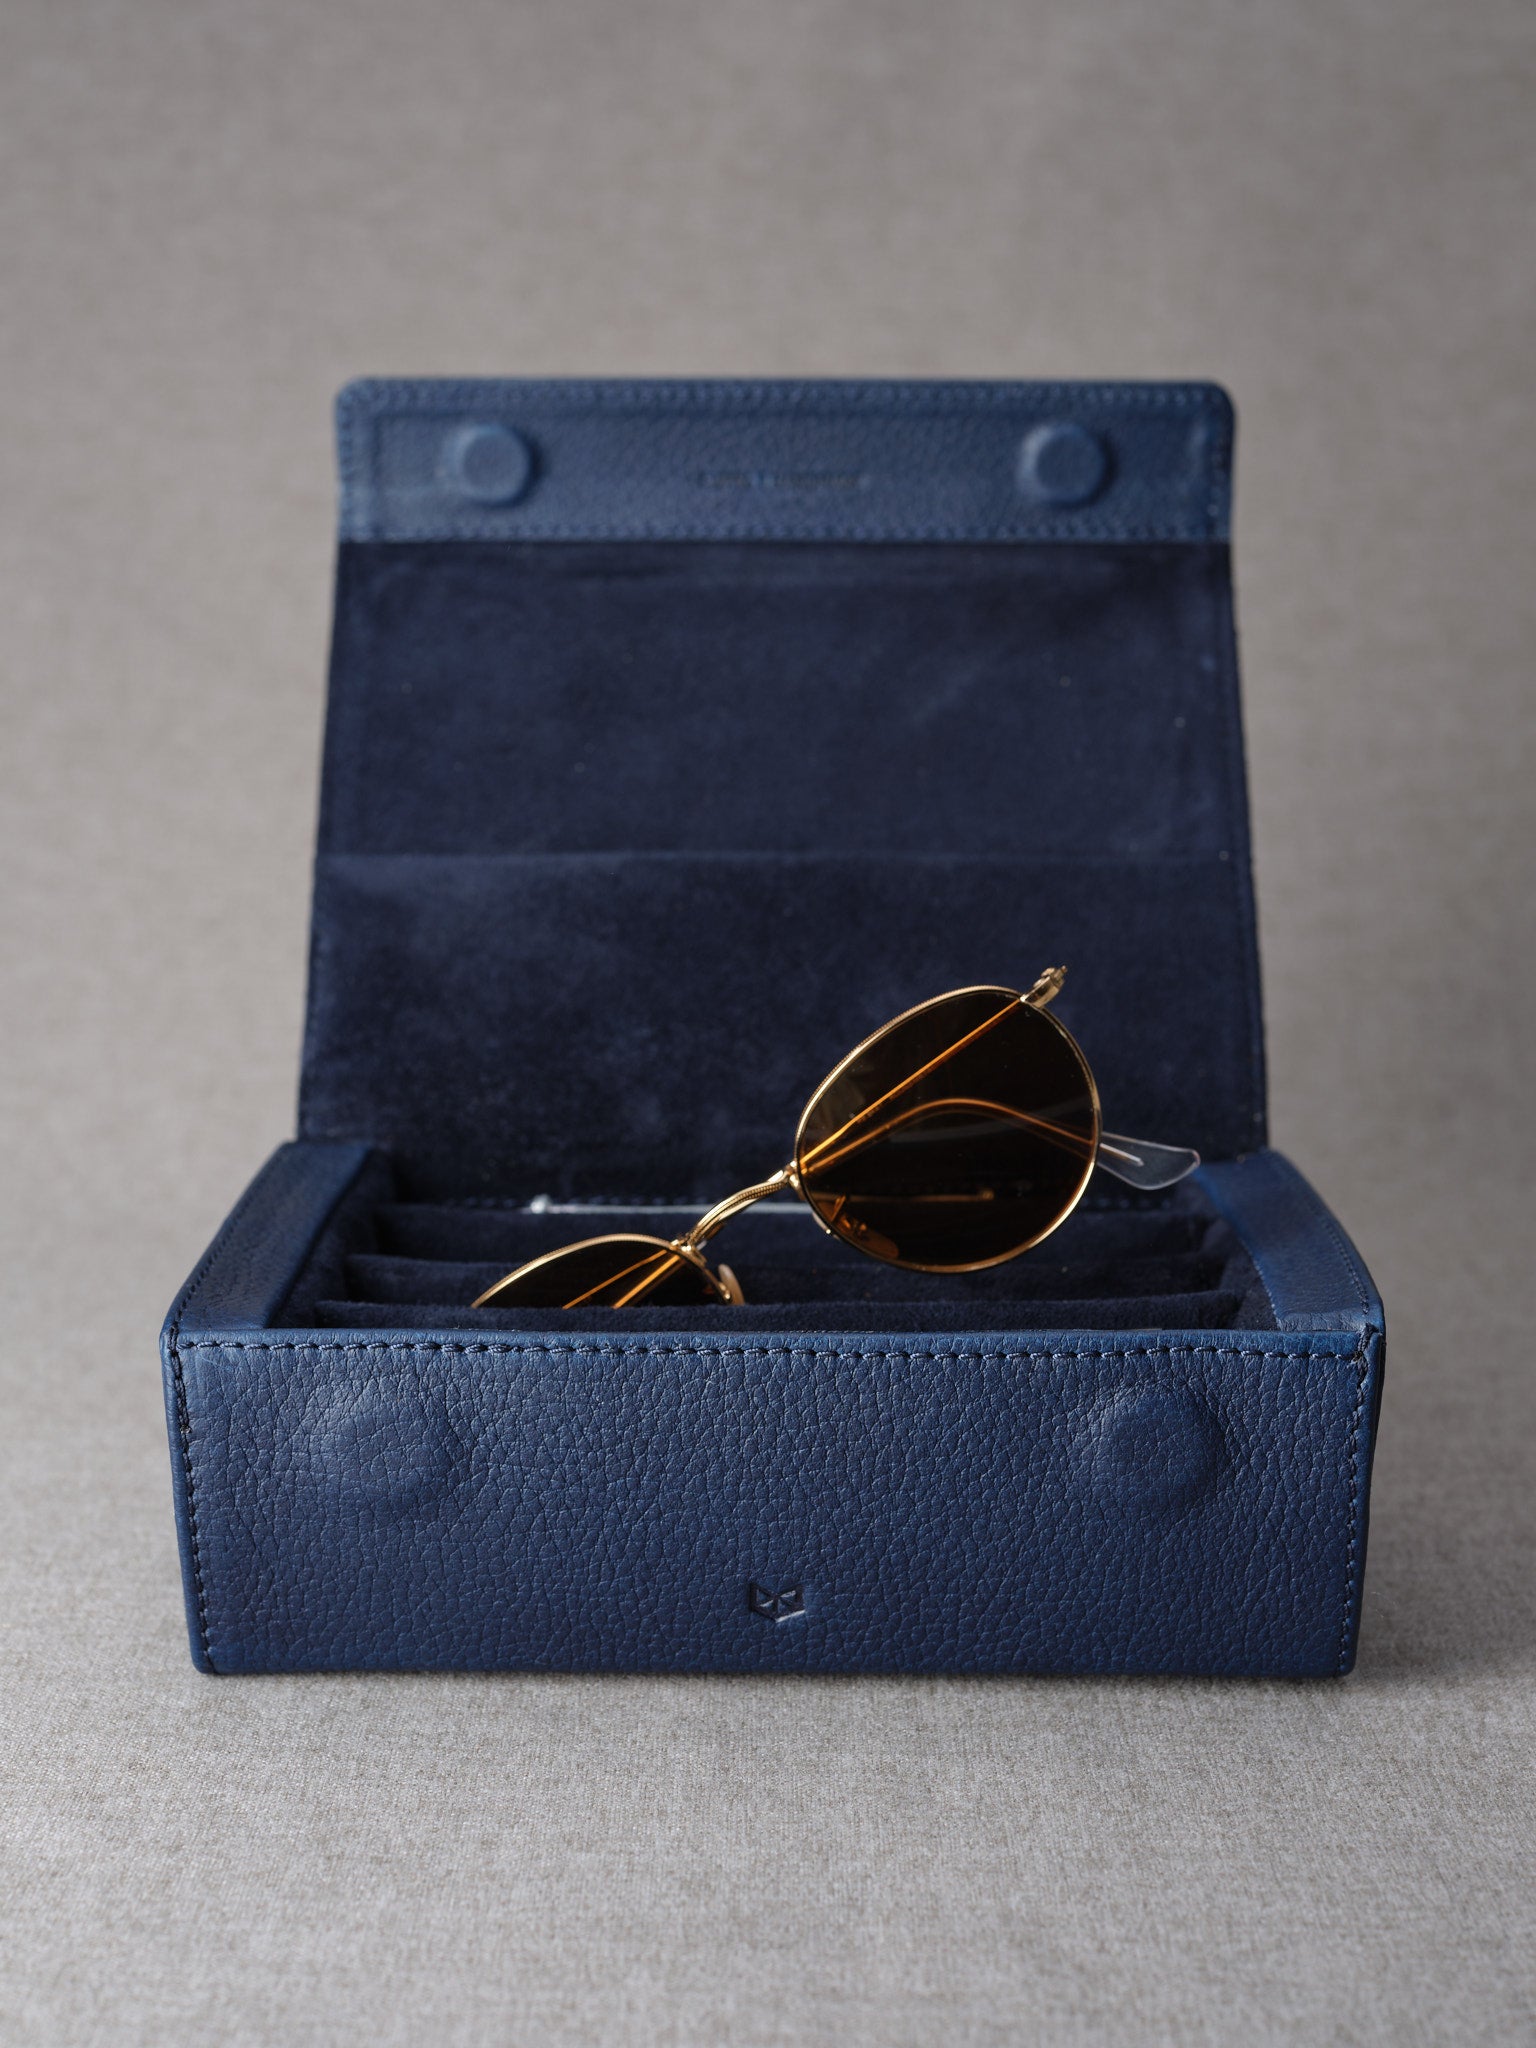 Ray Ban sunglasses case navy by Capra Leather